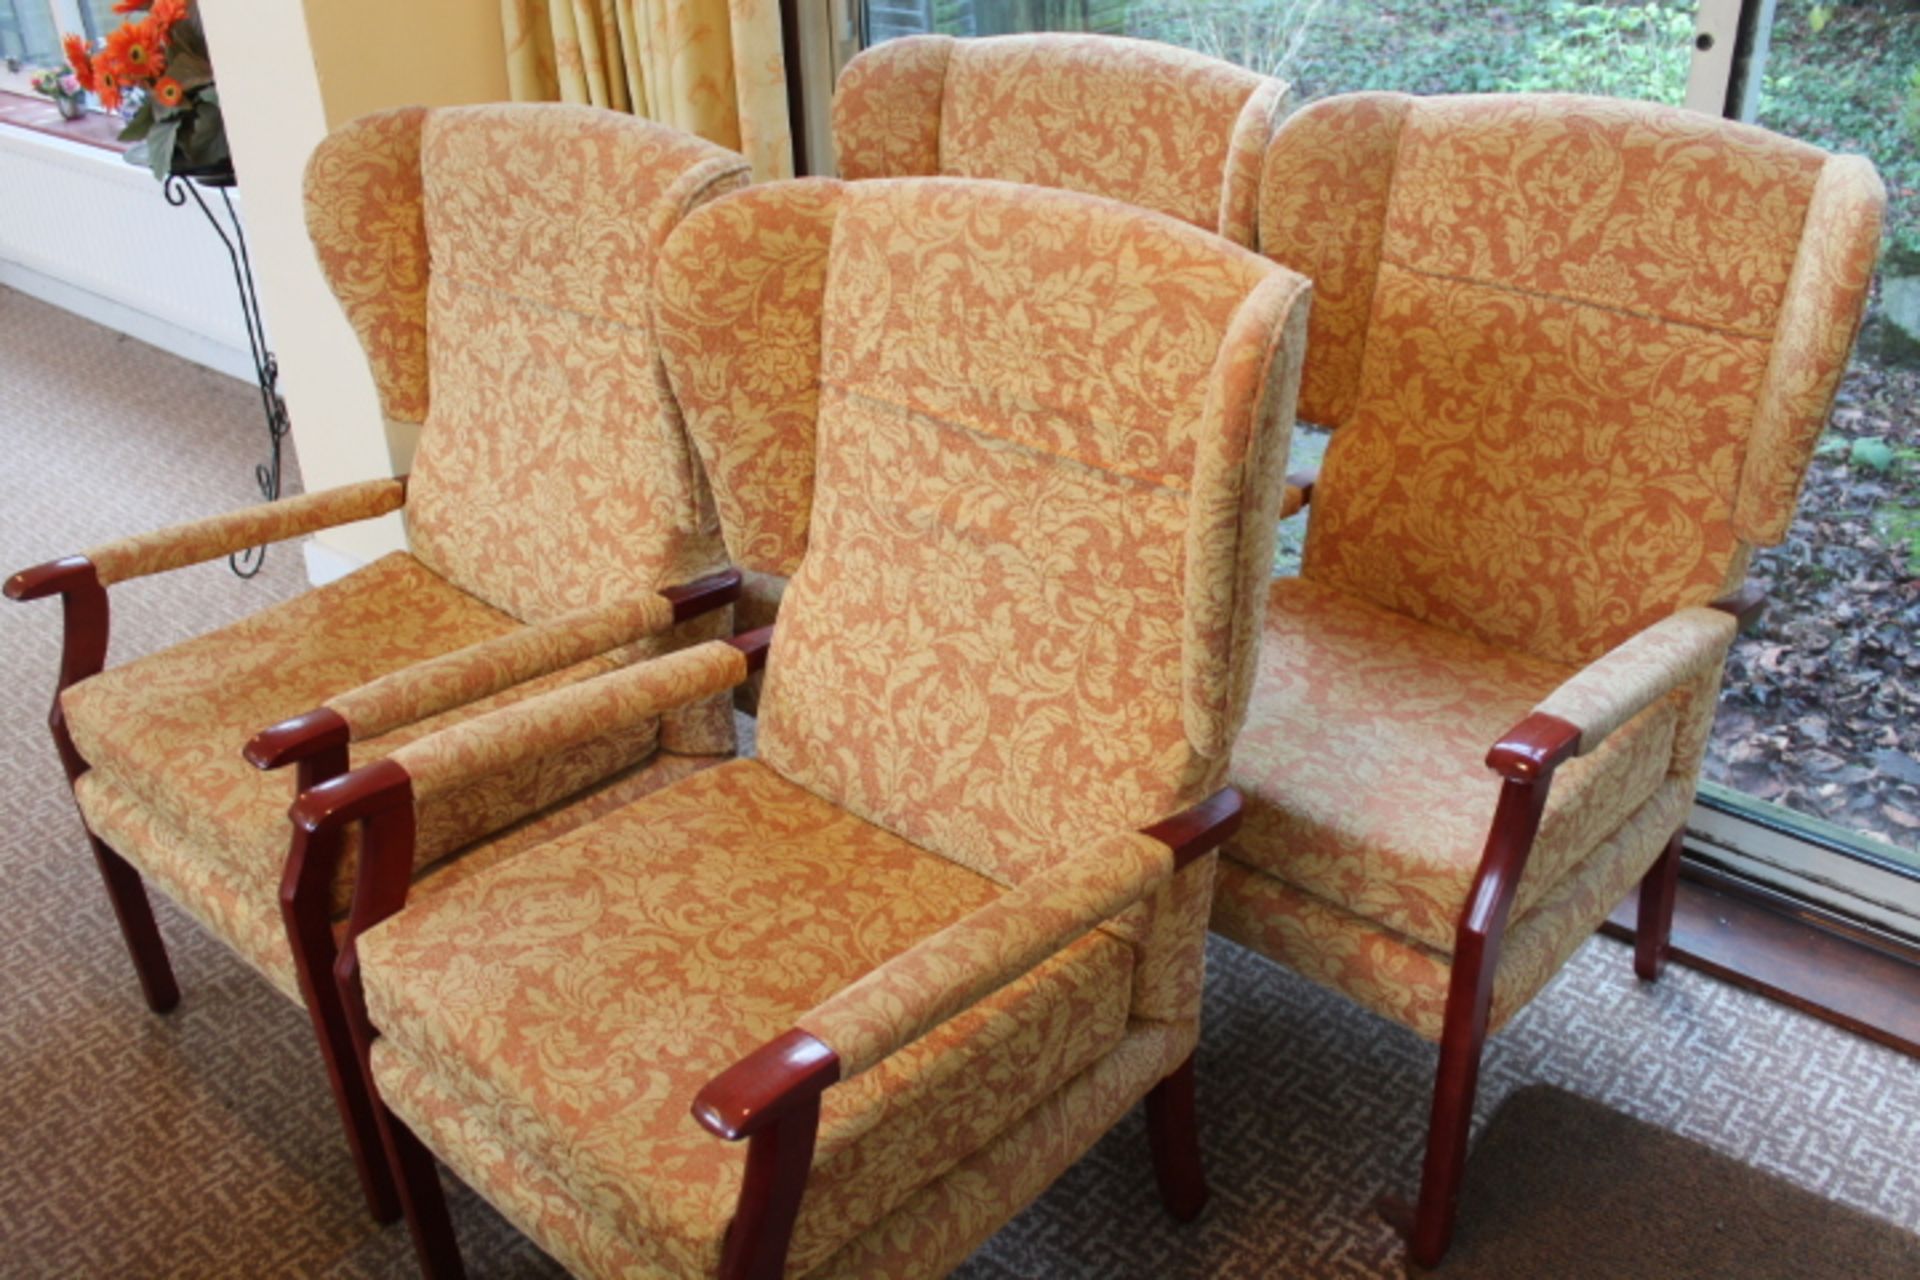 Four Upholstered Wingback Chairs - Image 2 of 2